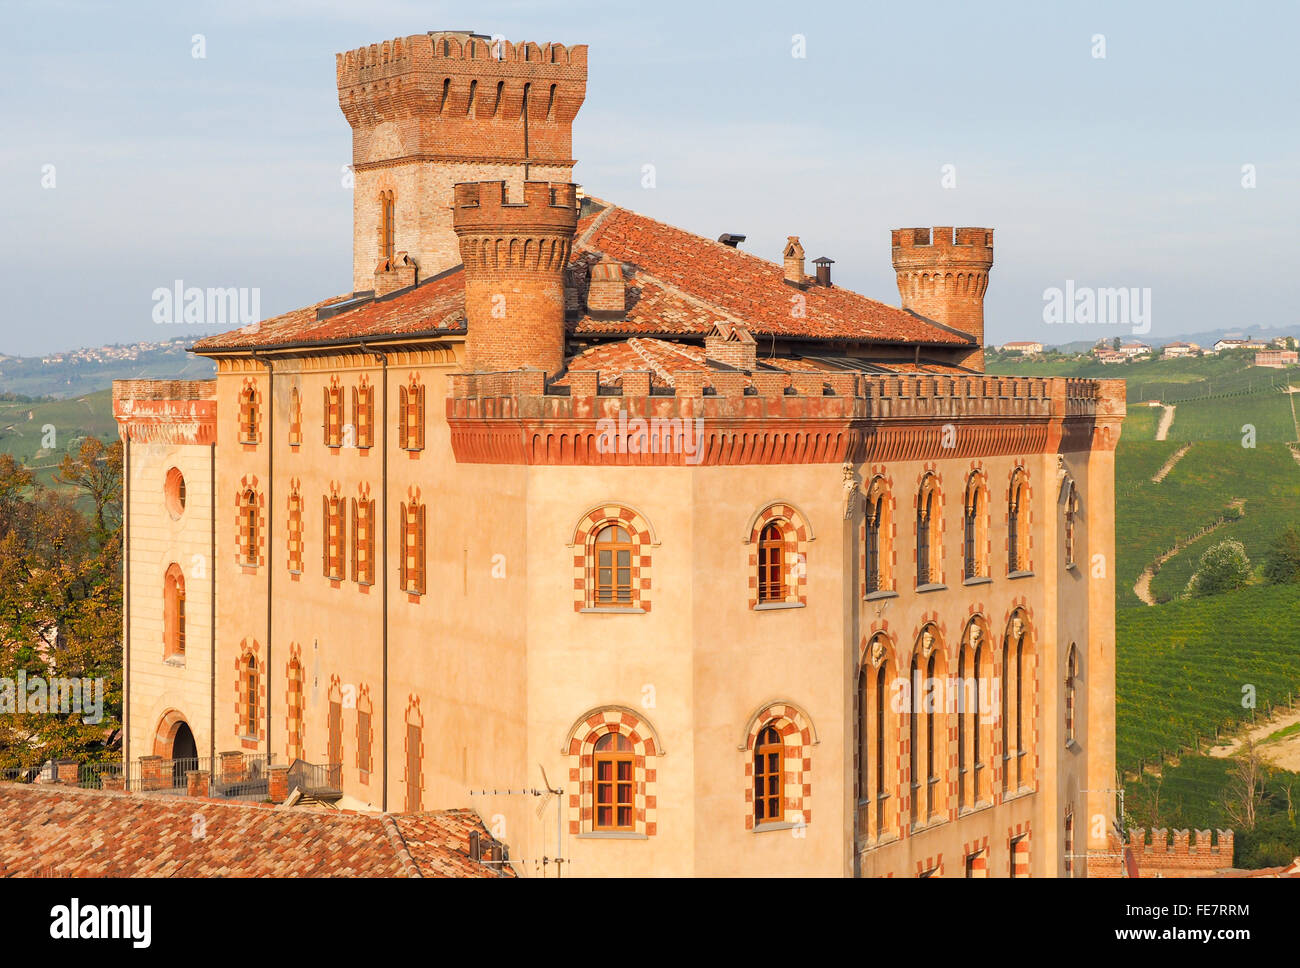 The castle of Barolo, town in the Langhe of Piedmont famous for its red wine. Stock Photo